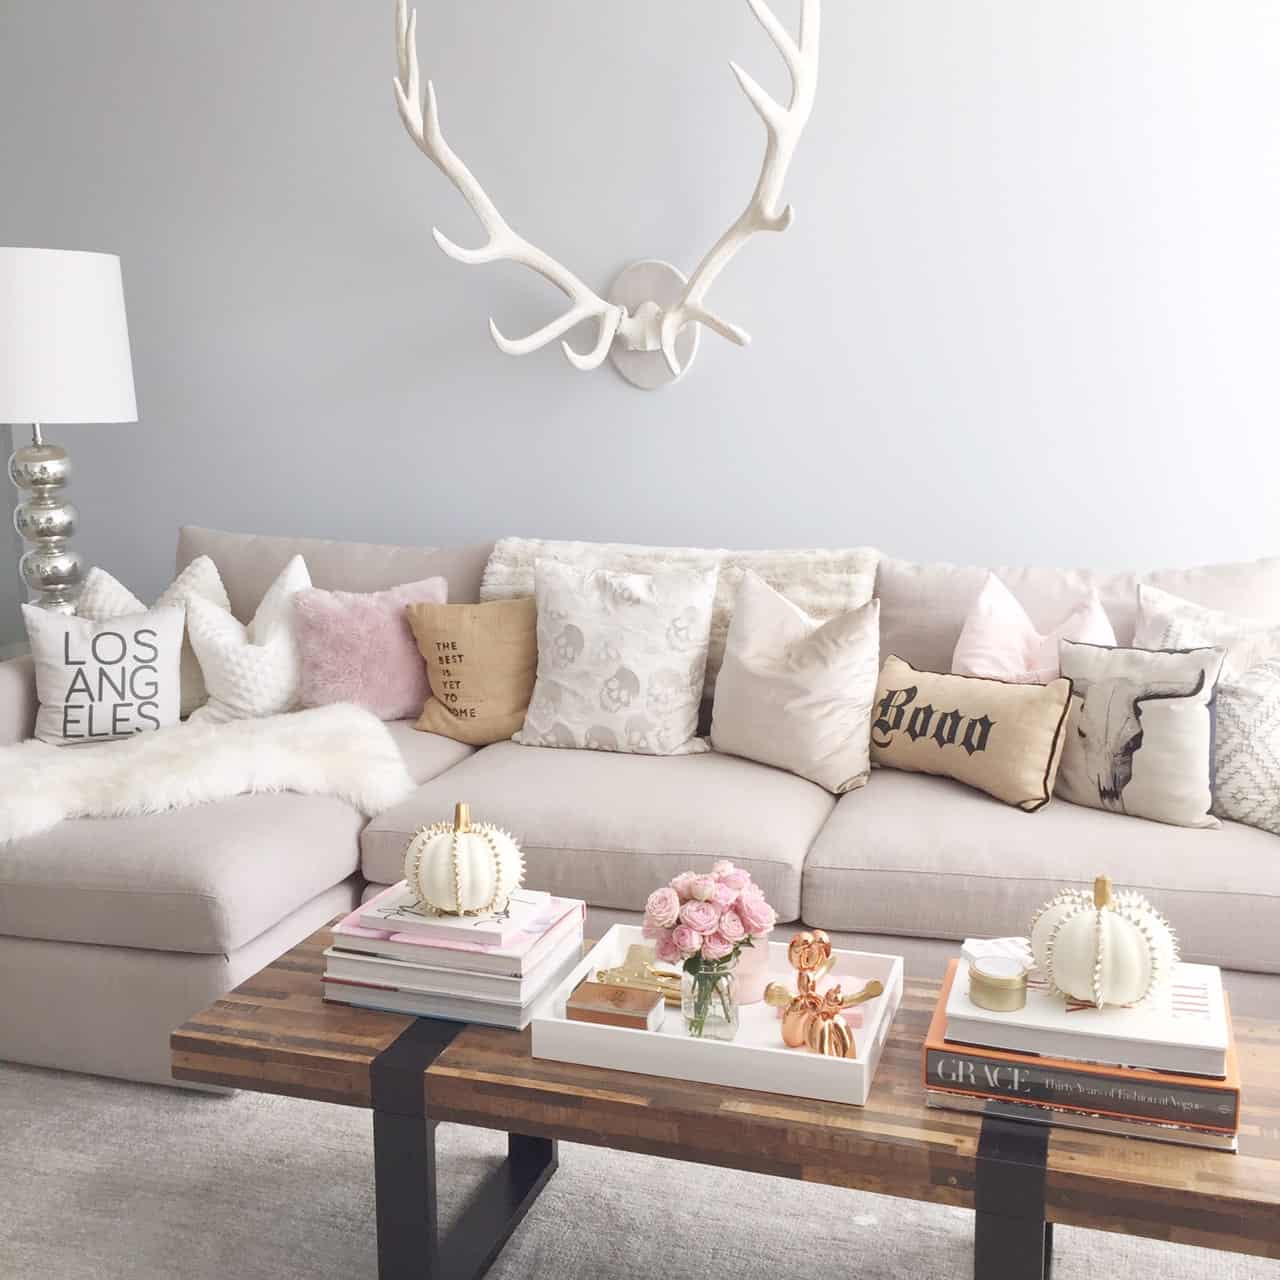 Combine white chic antlers with a faded wooden center table to offset the intricate style of the antlers.